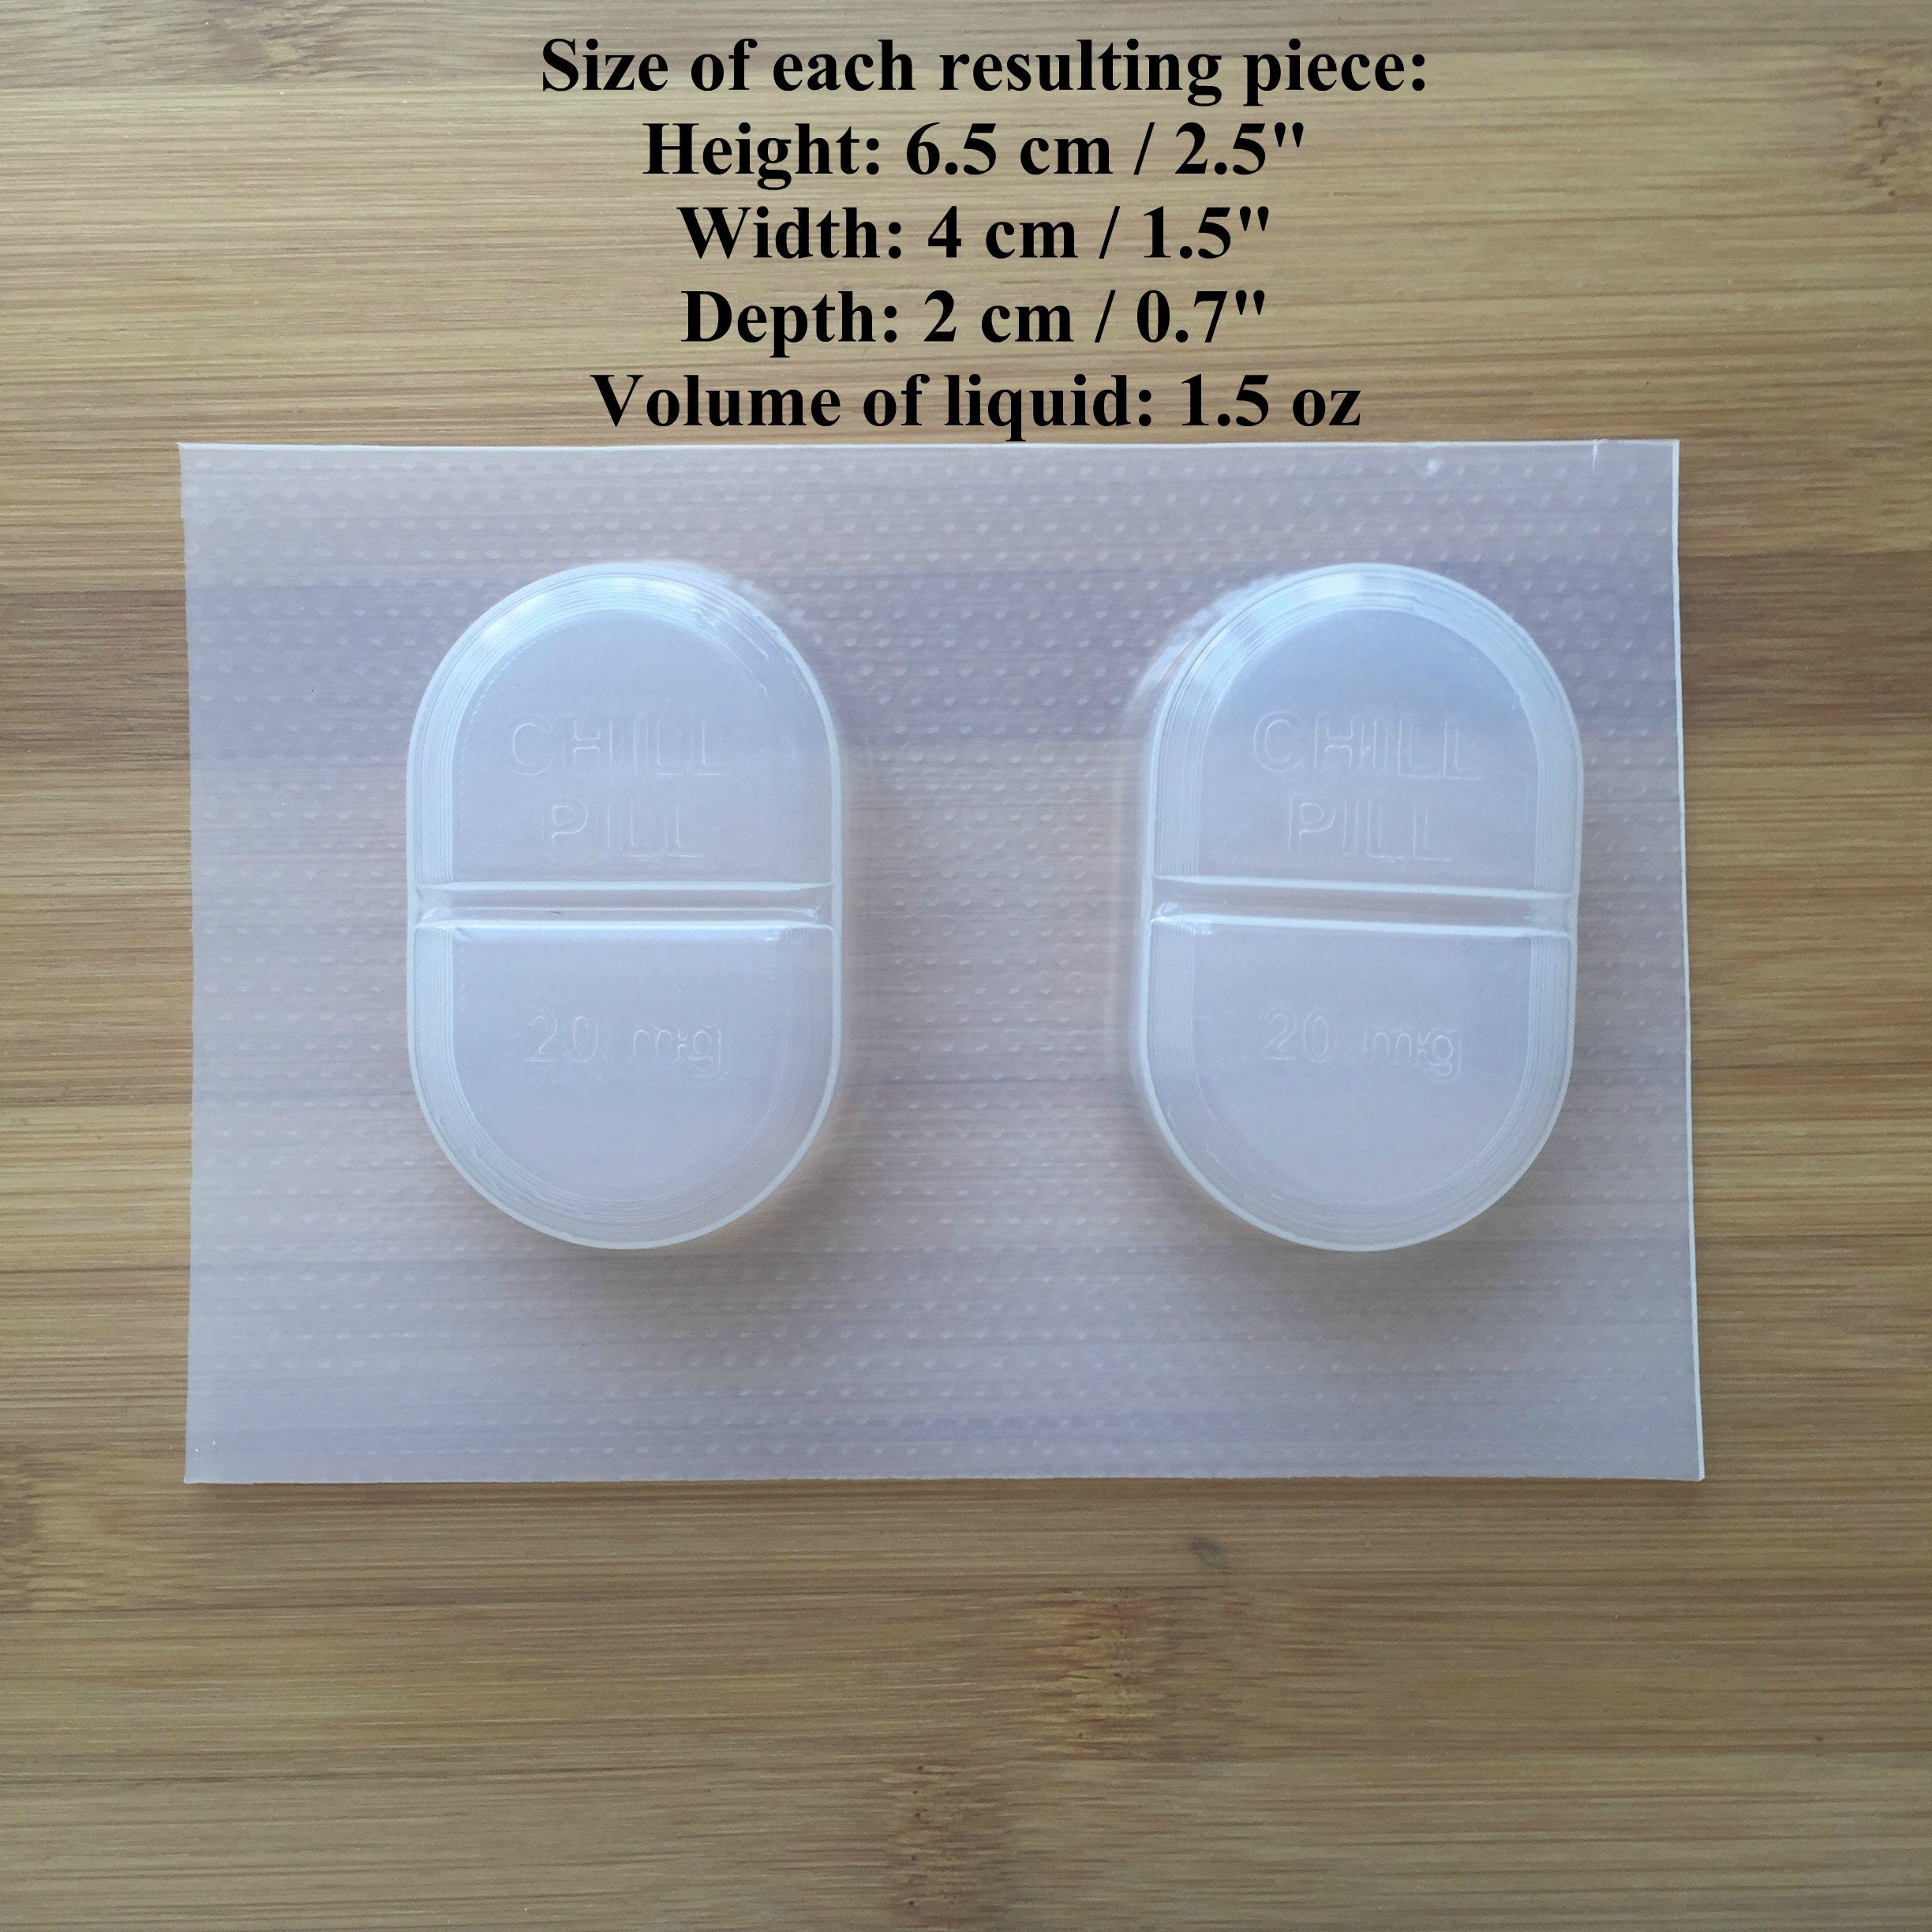 Small Heart Resin Mold Hearts Flexible Plastic Resin Molds Heart Fondant Mold  Heart Chocolate Mold Heart Jewelry Candle Wax Melt 